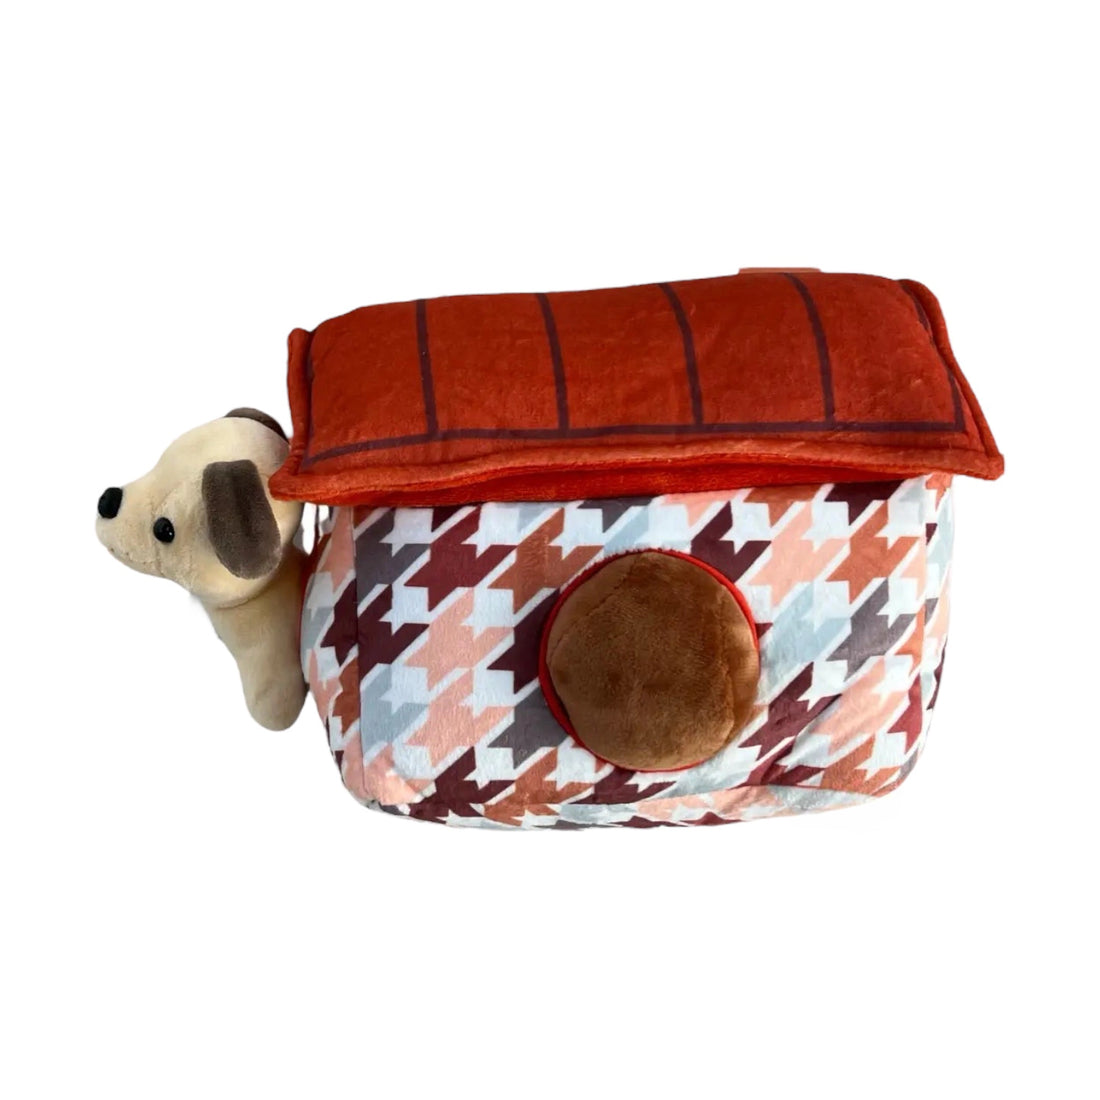 "Good Dogs Only" Dog Snuffle House